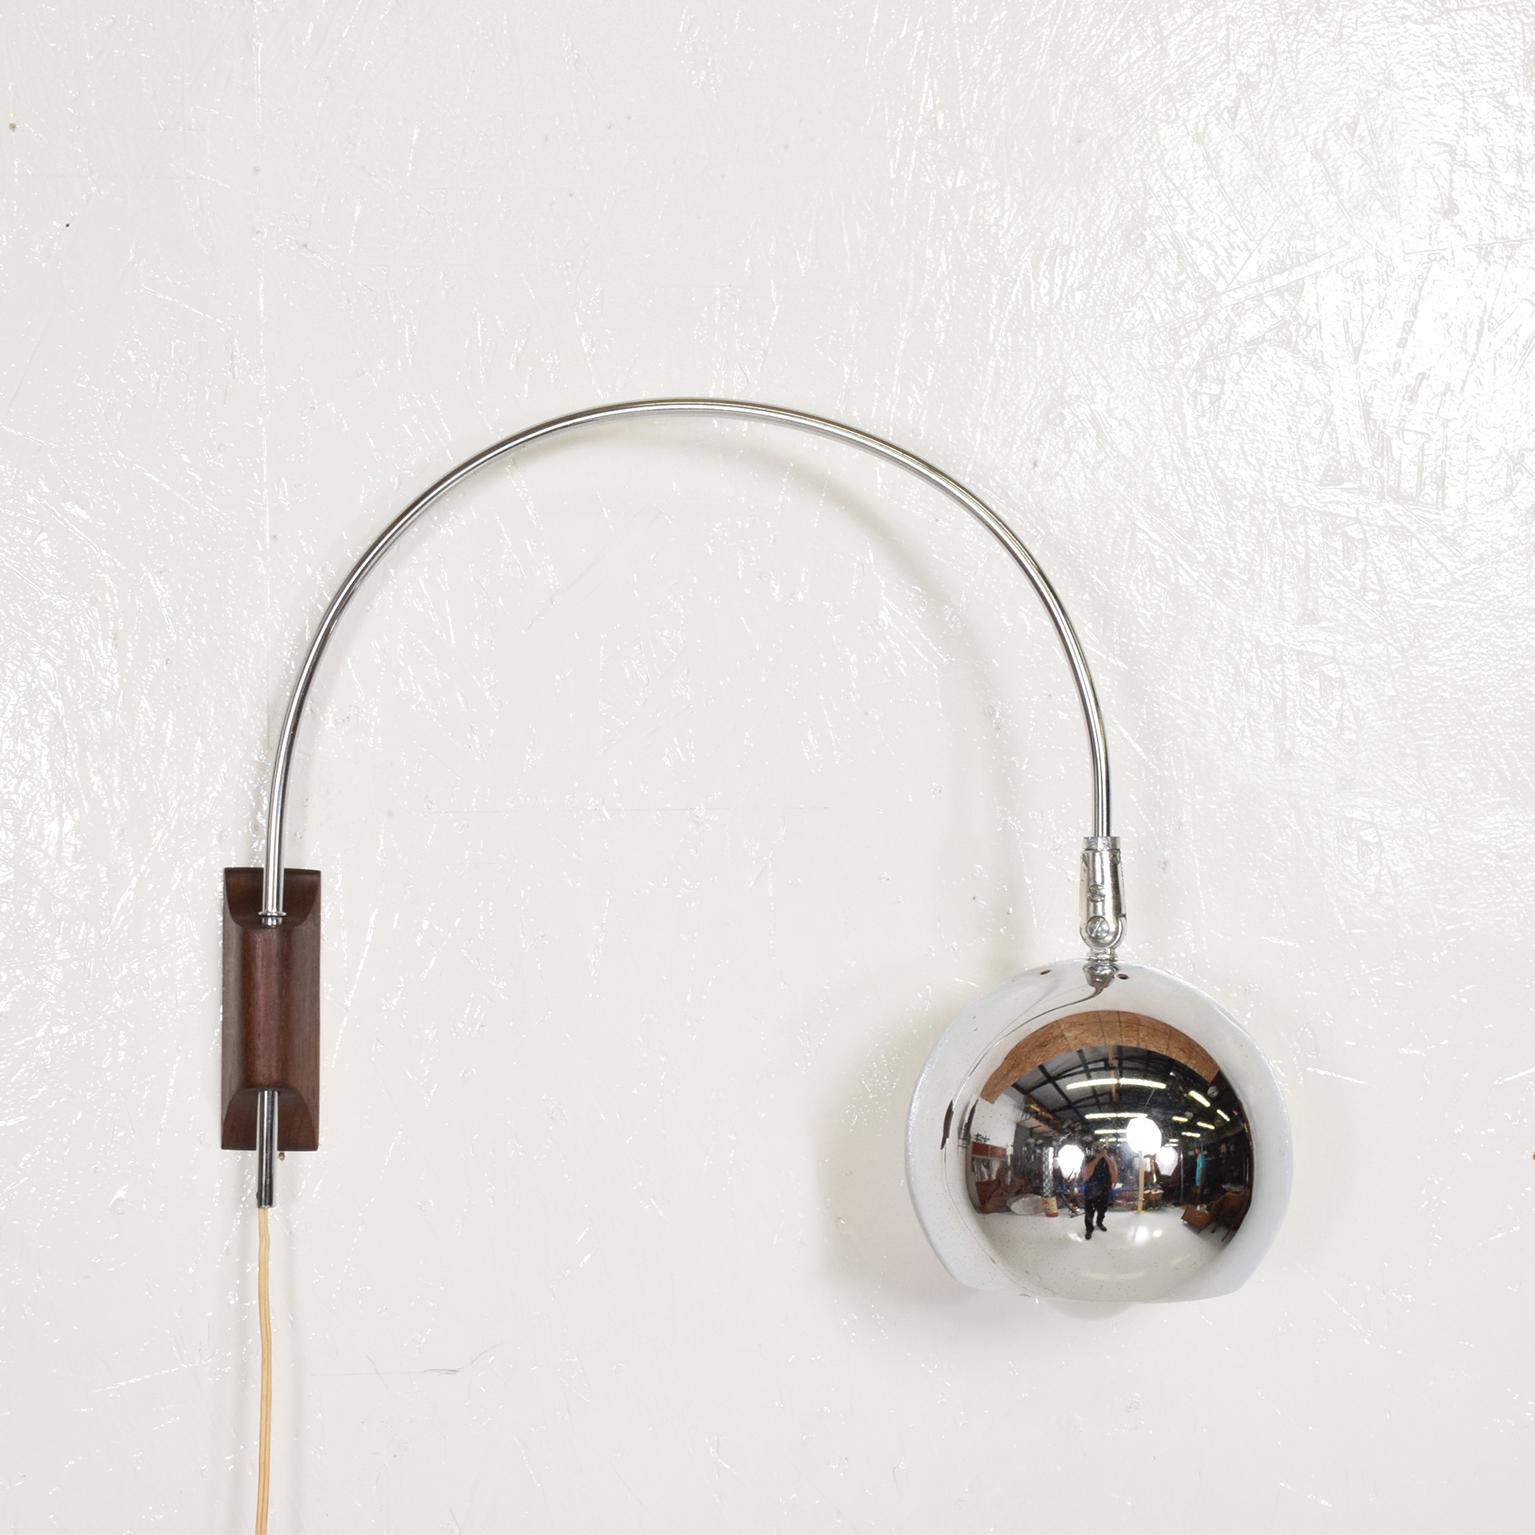 For your consideration, a Mid-Century Modern chrome wall sconce attributed Robert Sonneman.
Beautifully curved sconce attached to the wall with a solid walnut wall mount. Everything is working in perfect order.
The USA circa the late